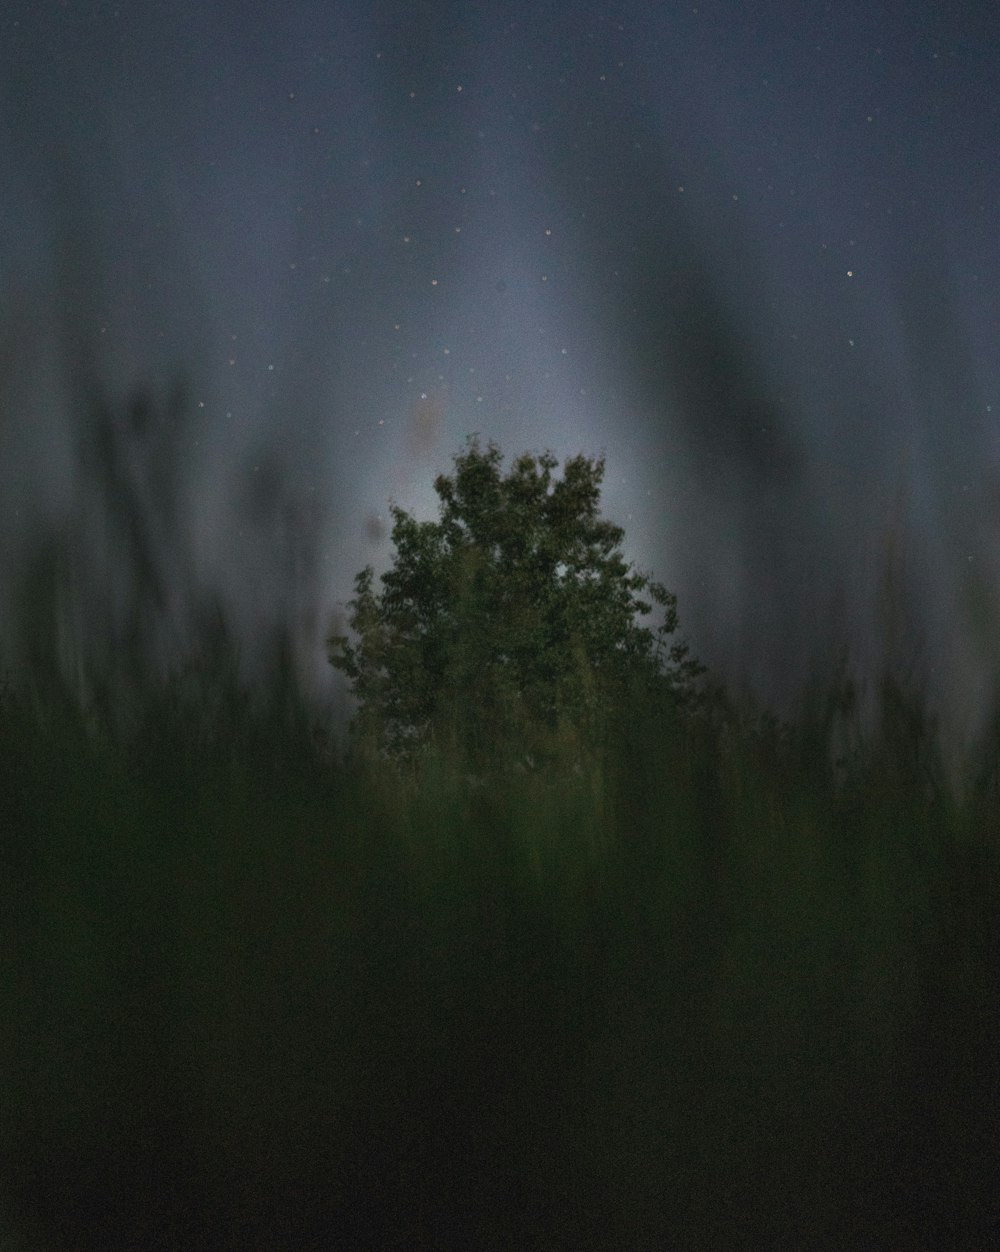 green tree under gray clouds at nighttime